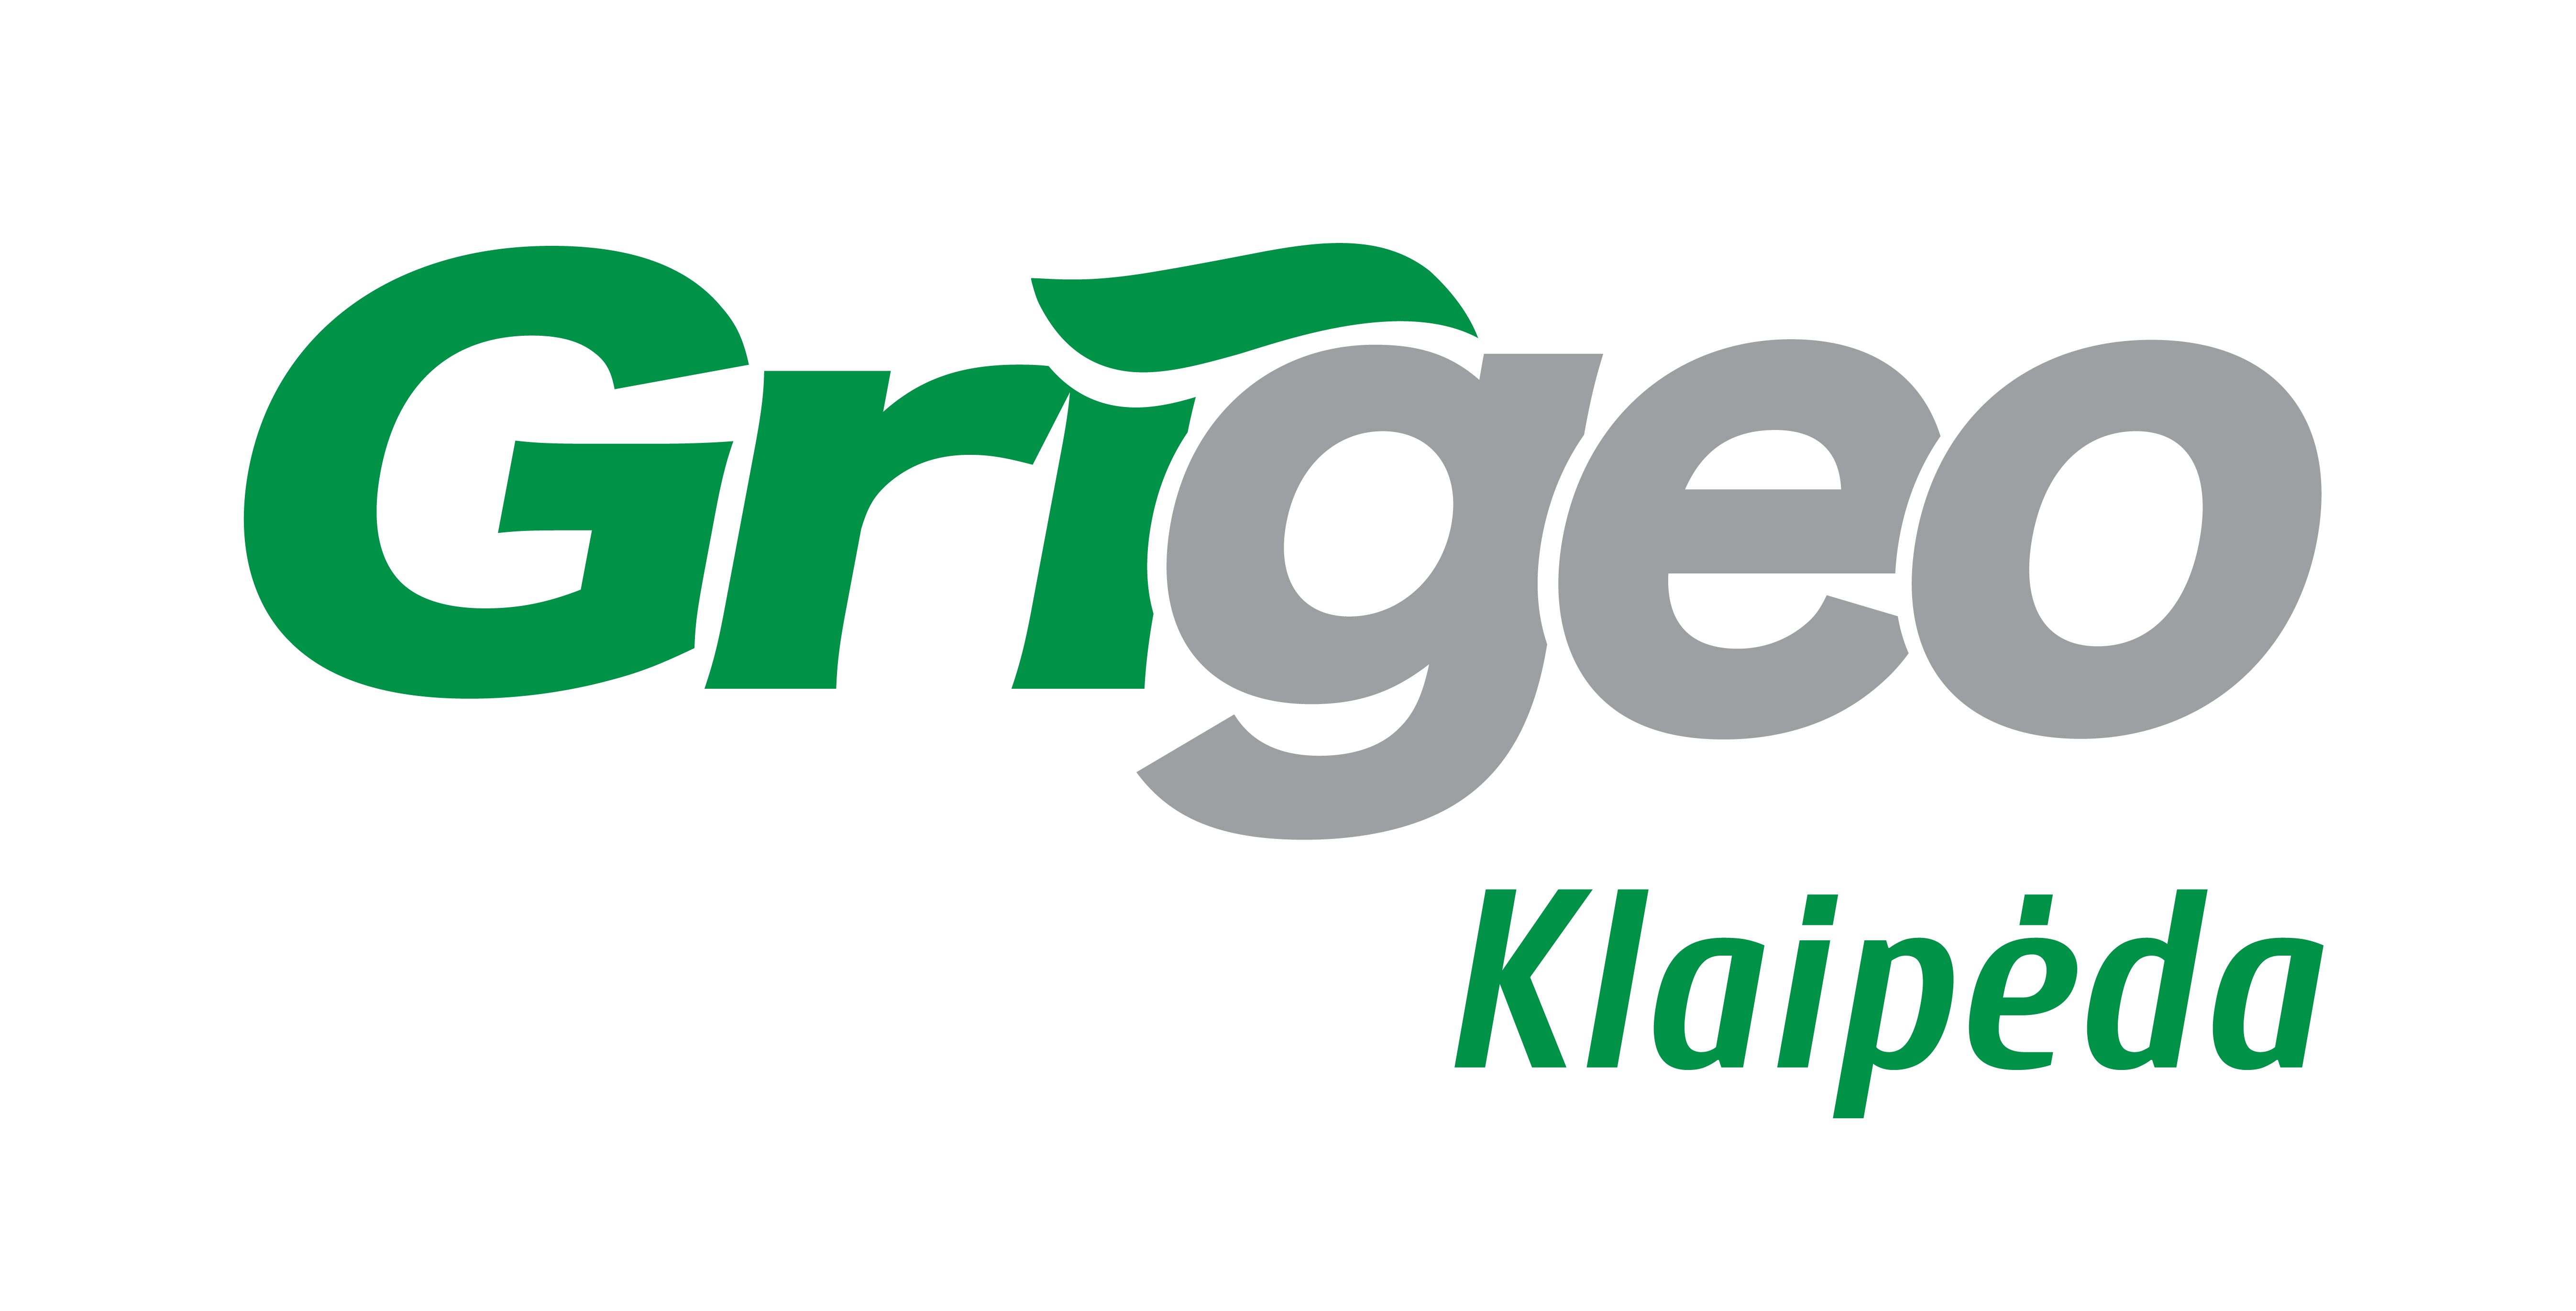 AB Grigeo Klaipėda turns the lessons learned into changes - presents an improvement plan